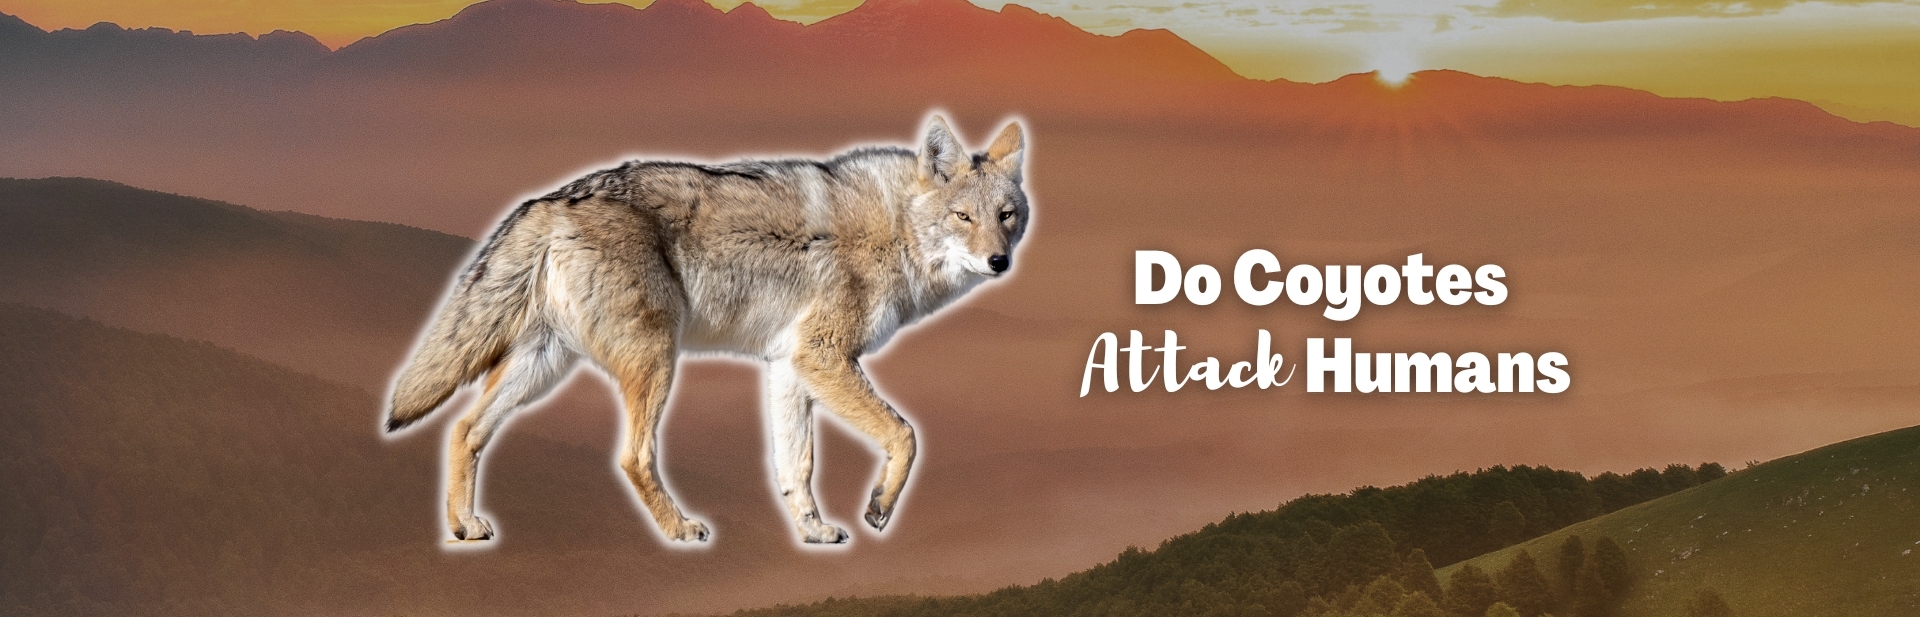 Do Coyotes Attack Humans? Exploring Our Relationship with Coytes & Tips for Coexisting Safely